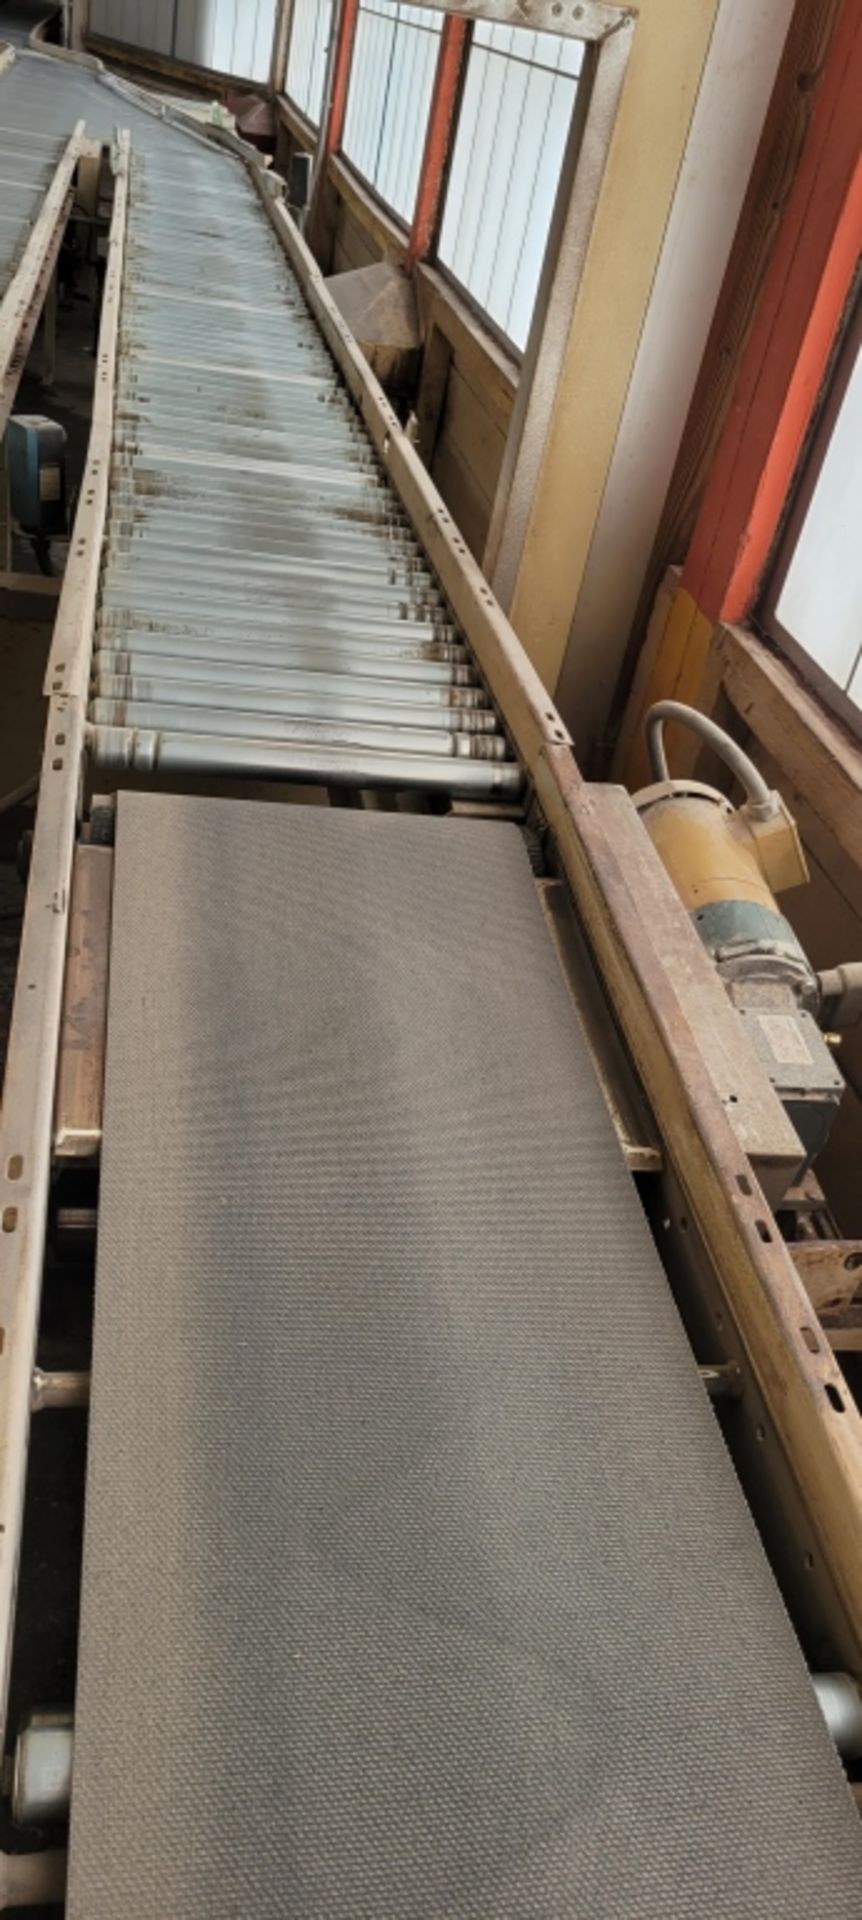 Buschman Inclined Conveyor System - BULK BID FOR LOTS 1118 TO 1125 - Image 6 of 12